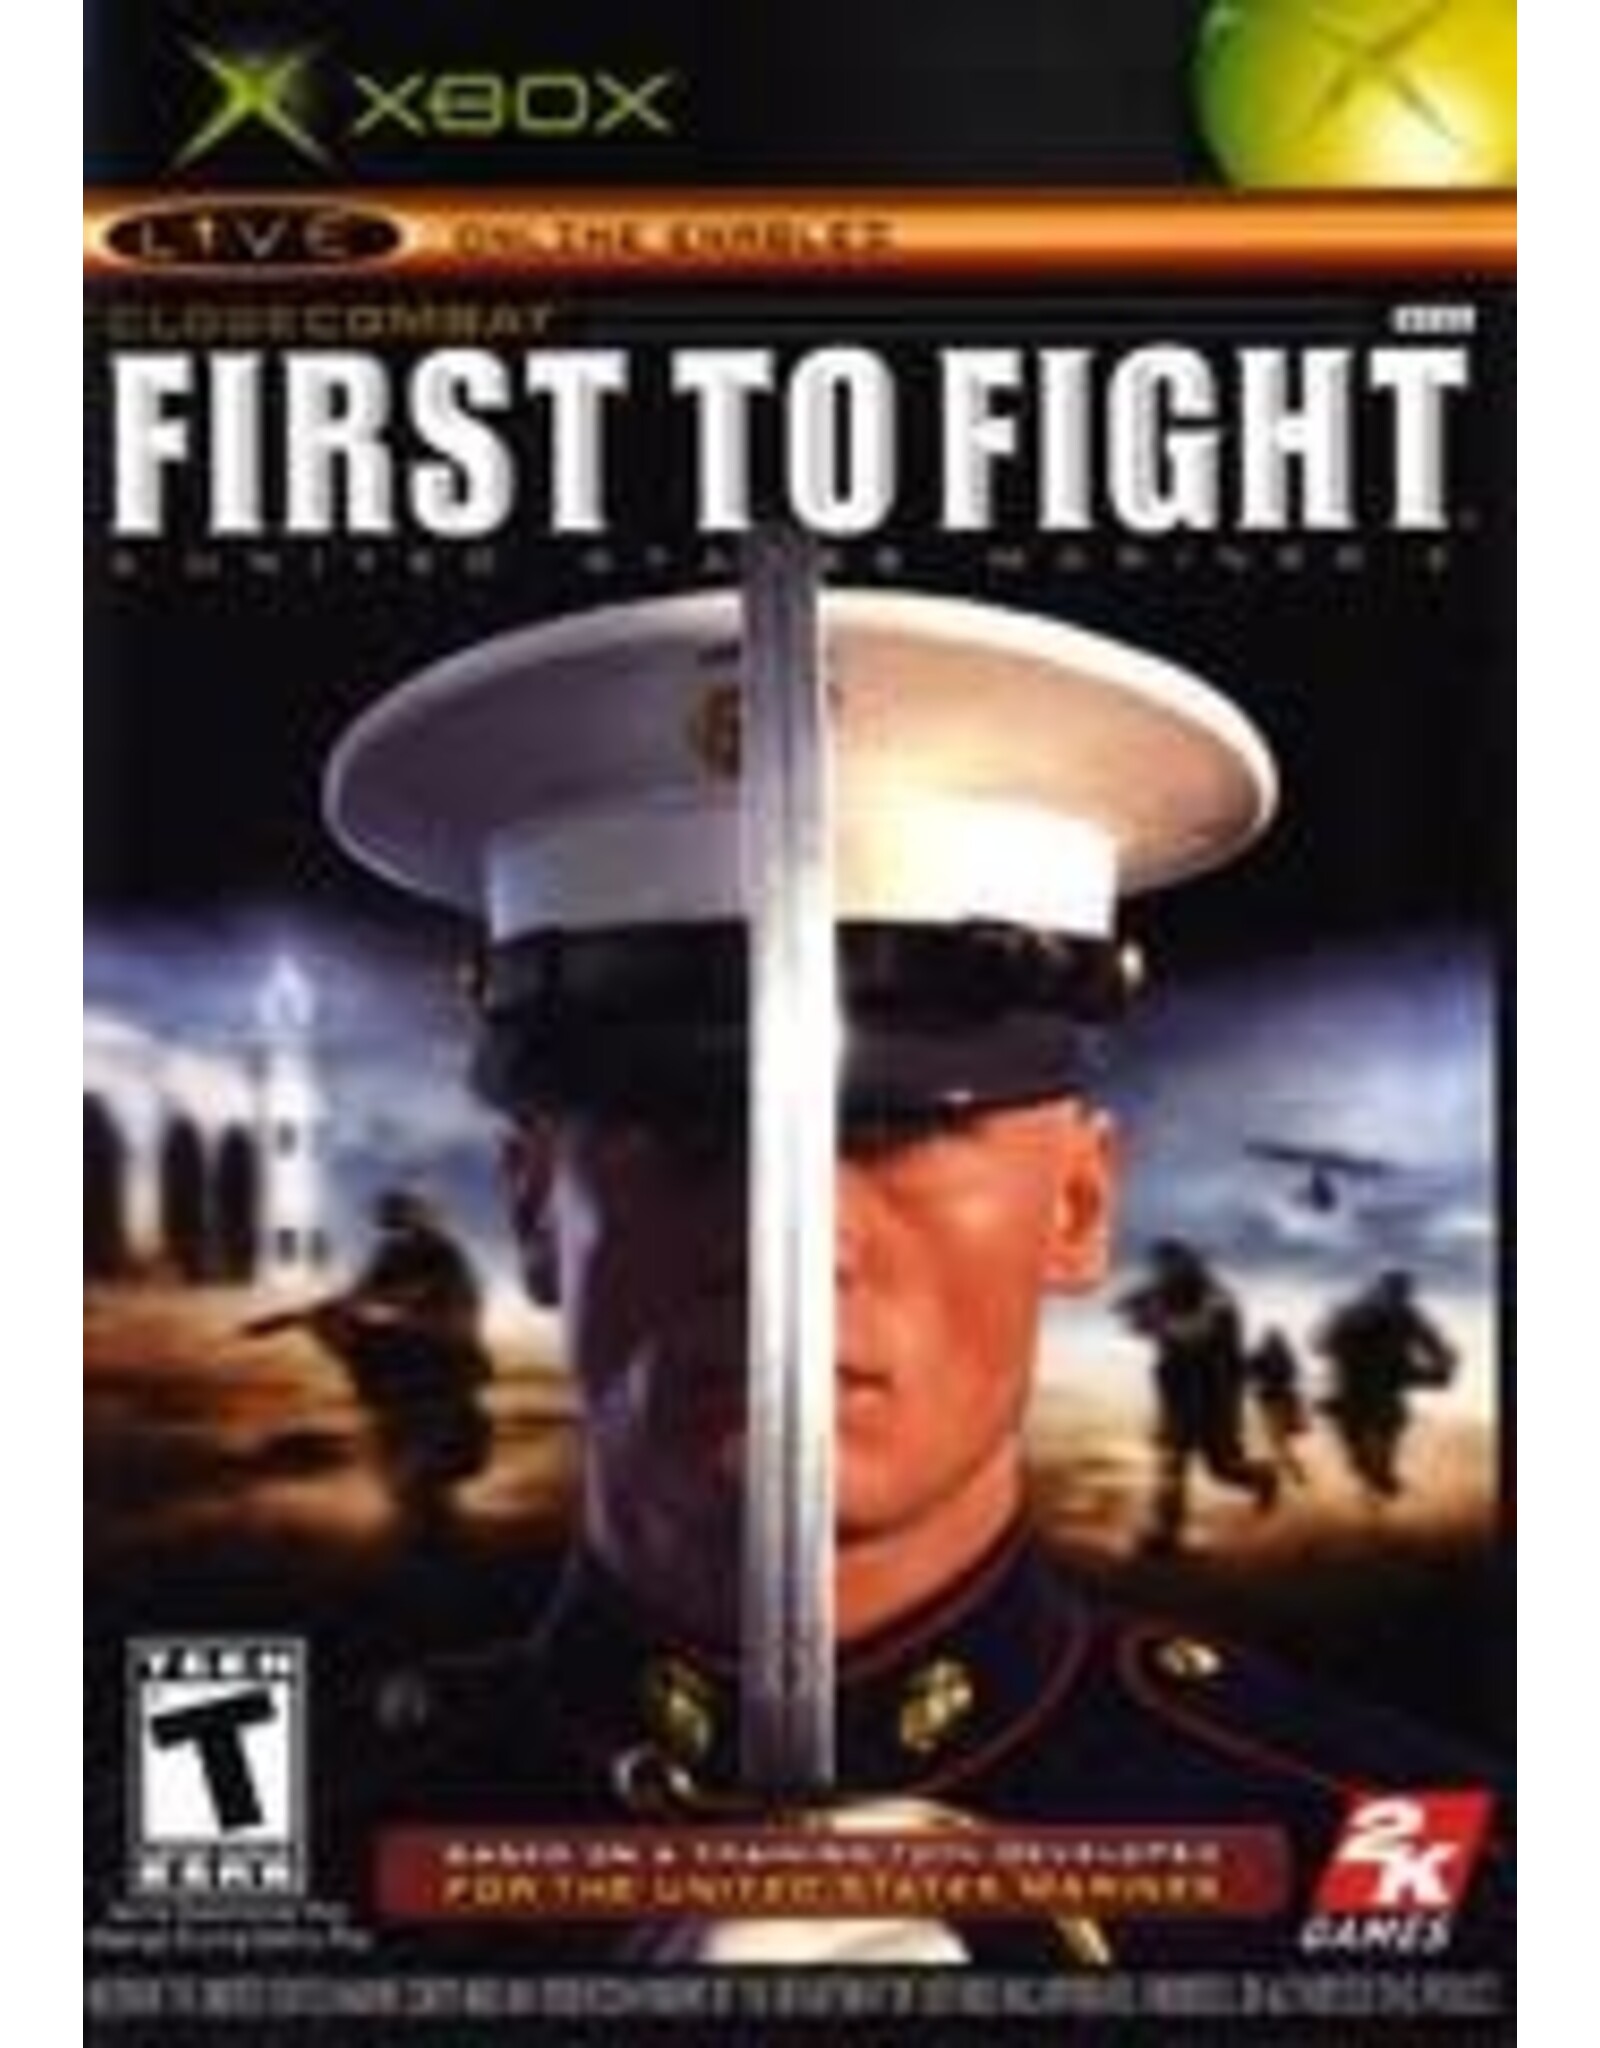 Xbox Close Combat First to Fight (No Manual)